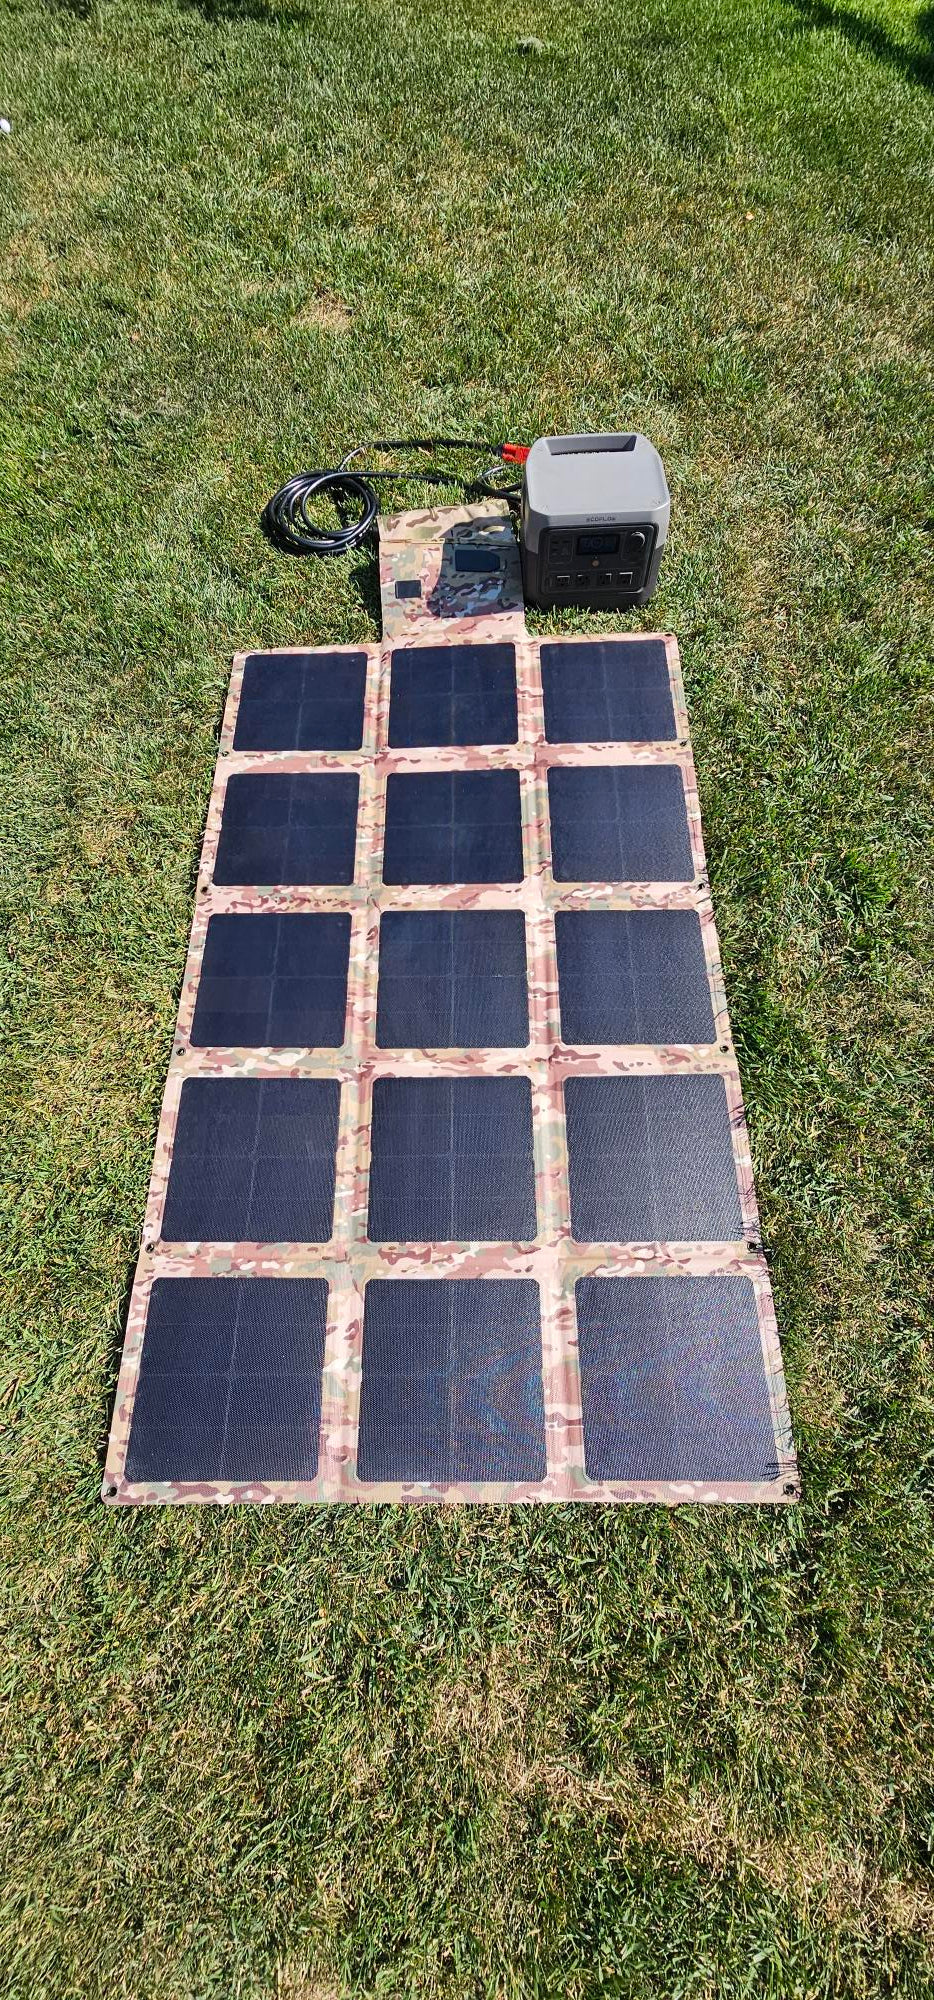 220W Solar Blanket & EcoFlow RIVER 2 Max Package NO US SALES TAX!